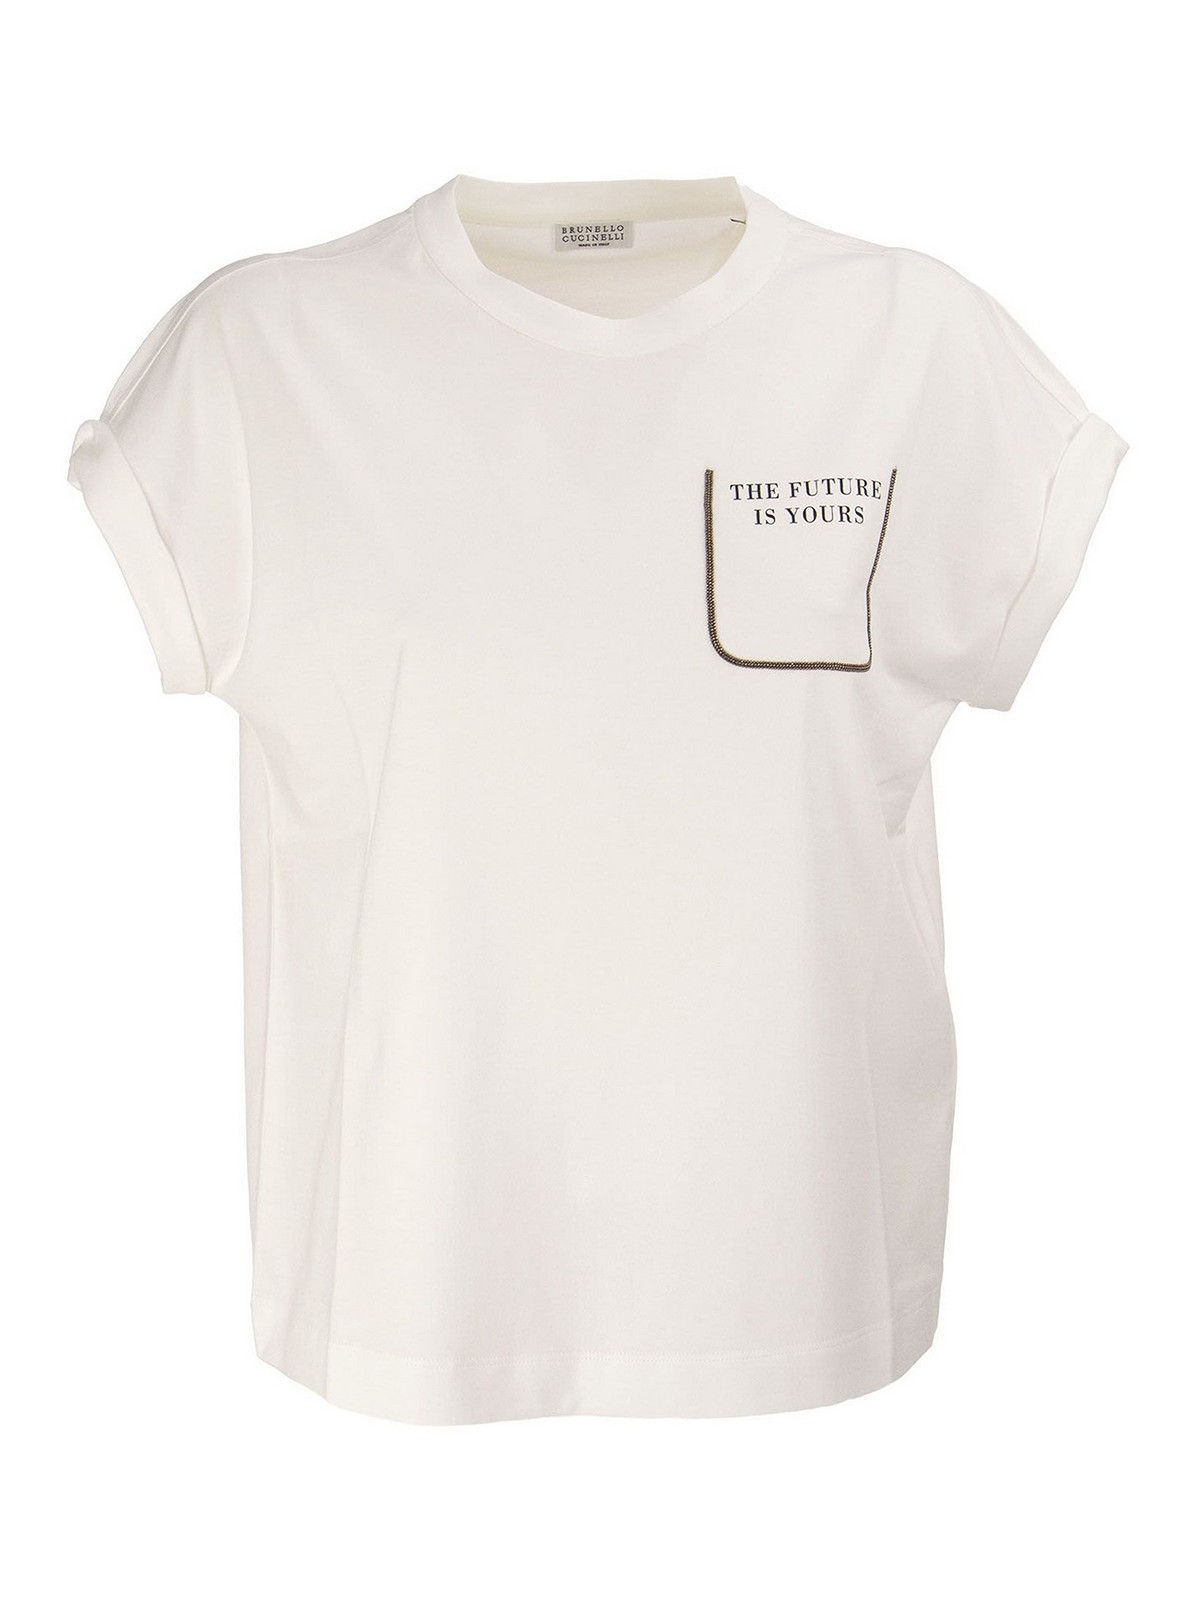 T-shirts Brunello Cucinelli - The Future Is Yours T-shirt - M0A45BP110C159